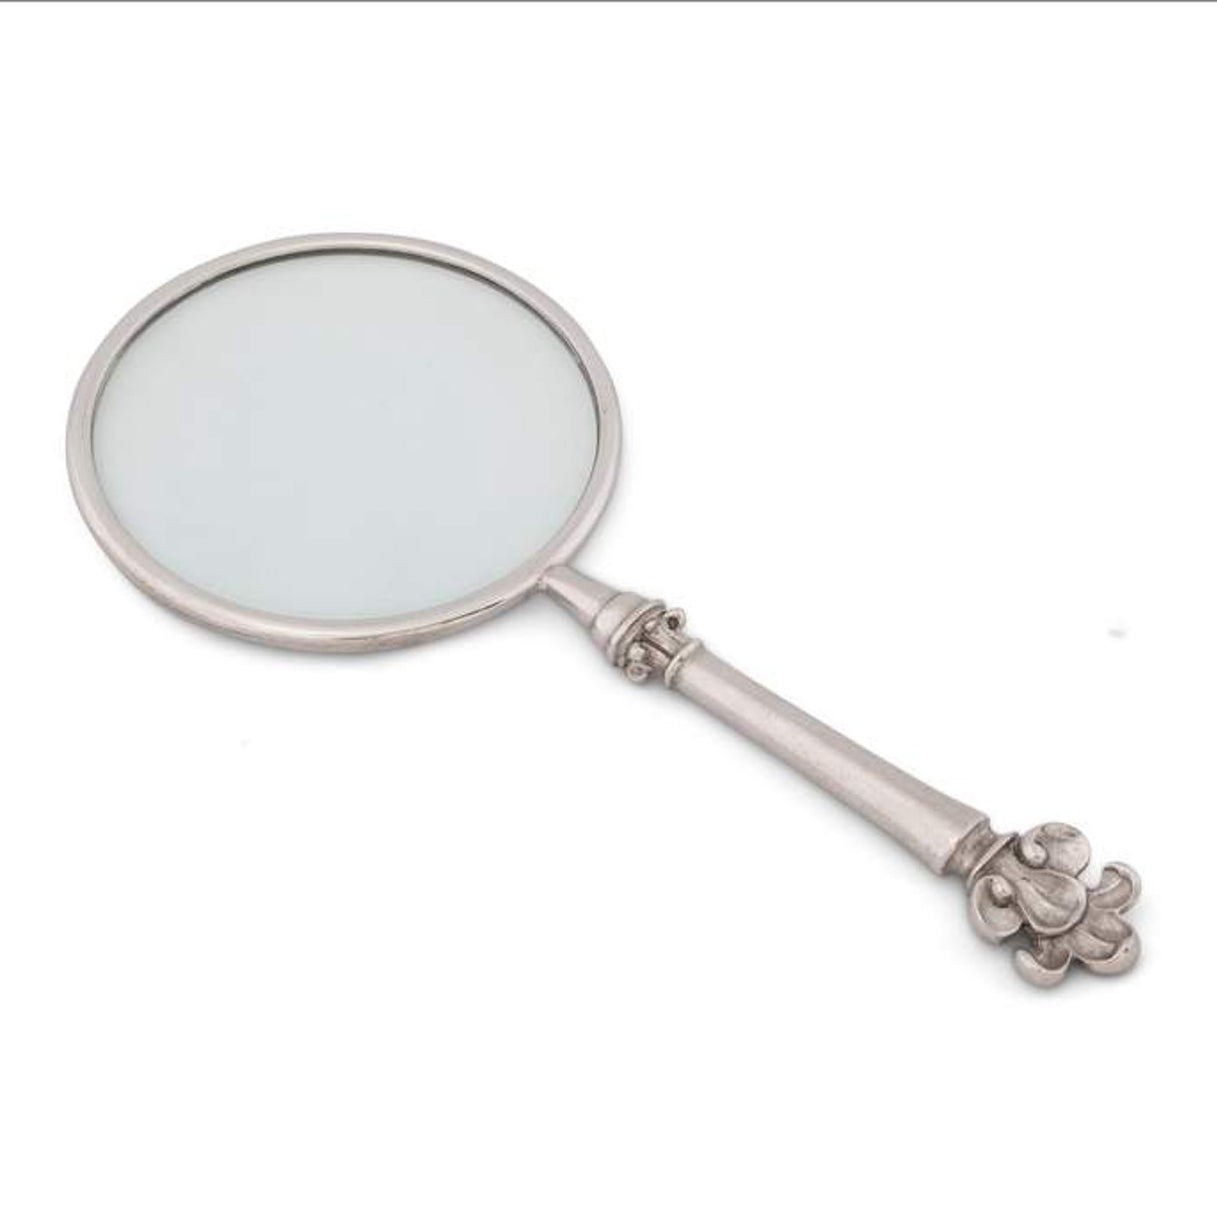 Pewter provencal pattern Magnifier 4"